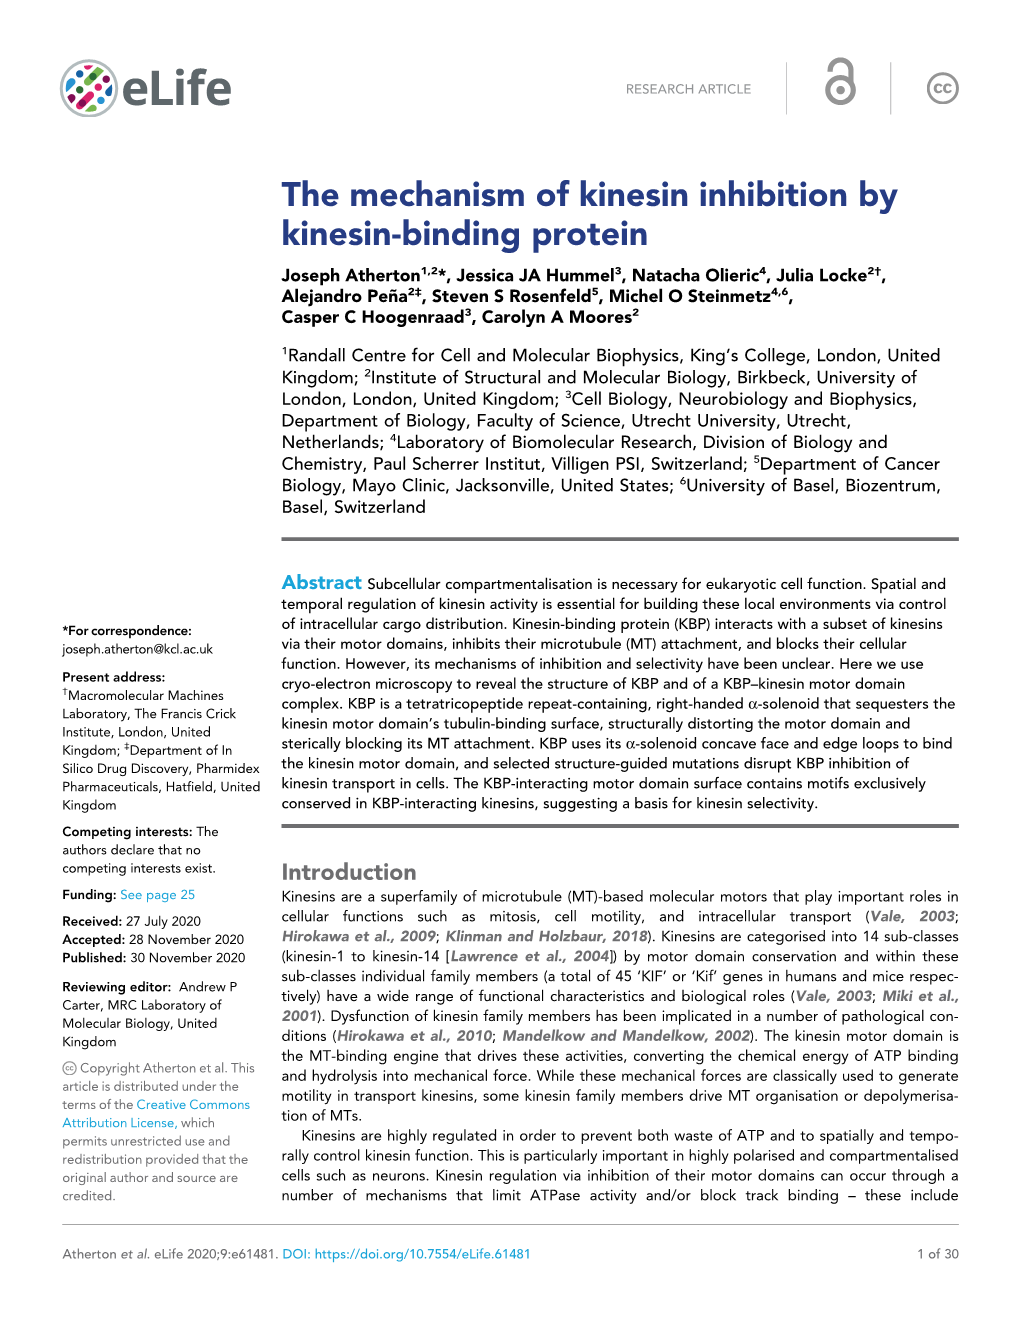 The Mechanism of Kinesin Inhibition by Kinesin-Binding Protein